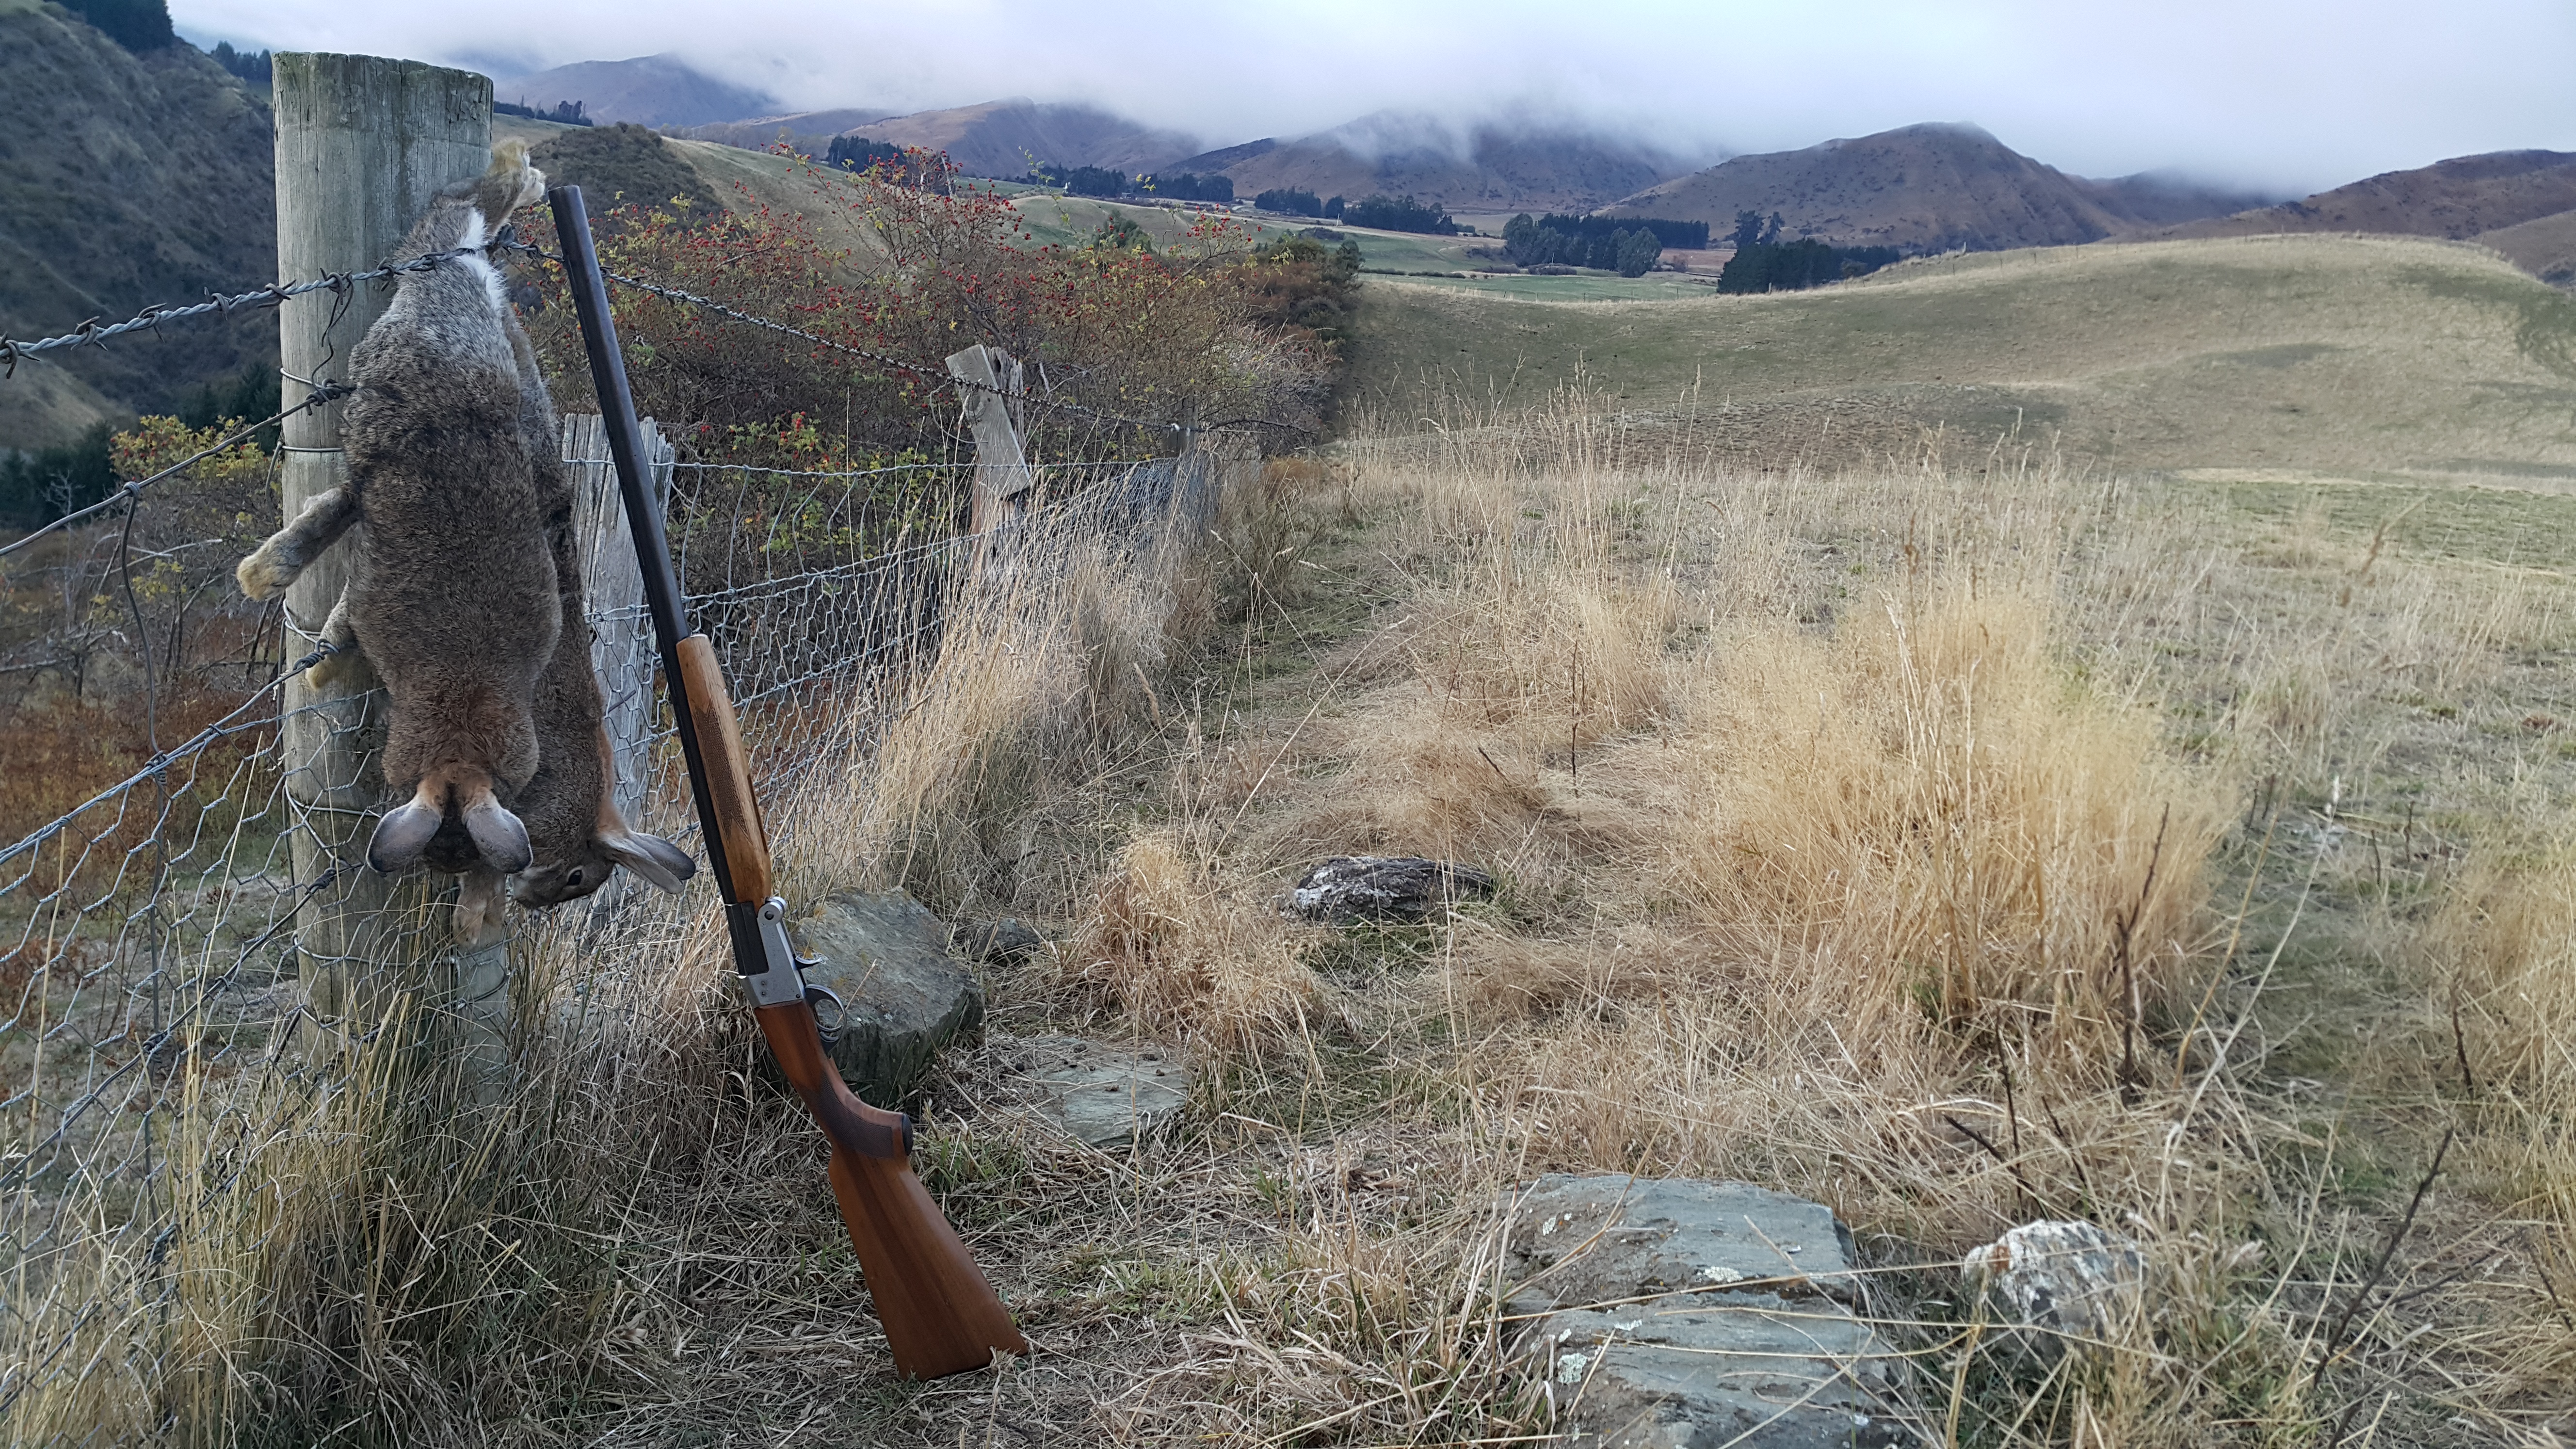 https://www.nzhuntingandshooting.co.nz/attachments/f11/196918d1652597190-what-little-pesties-did-you-bowl-over-today-20220515_171038.jpg